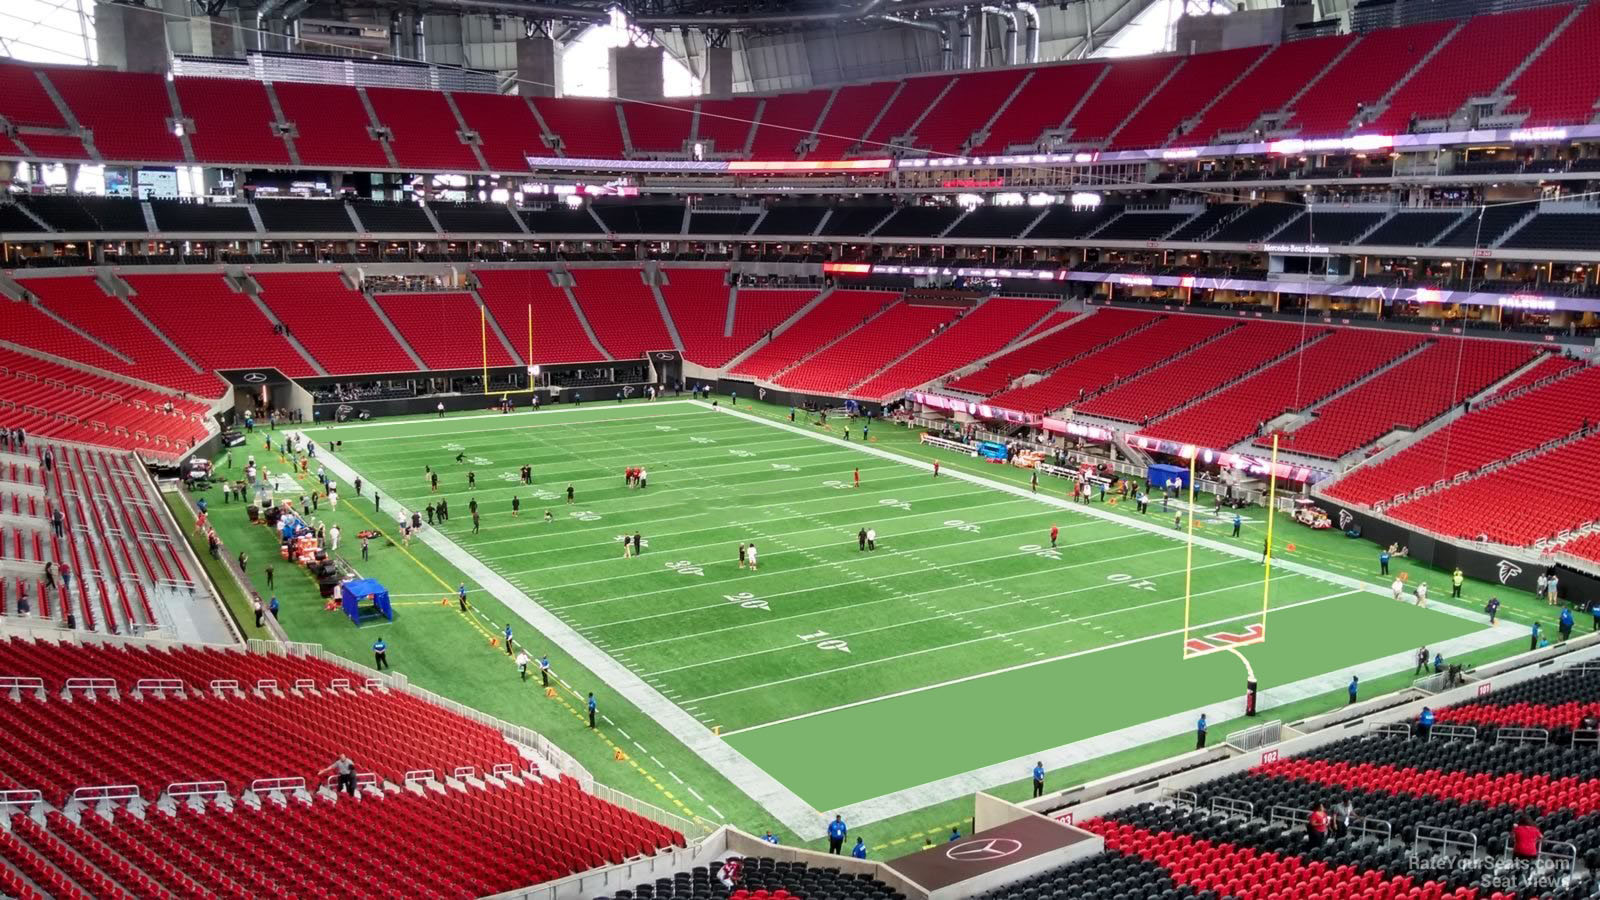 section 202, row 6 seat view  for football - mercedes-benz stadium